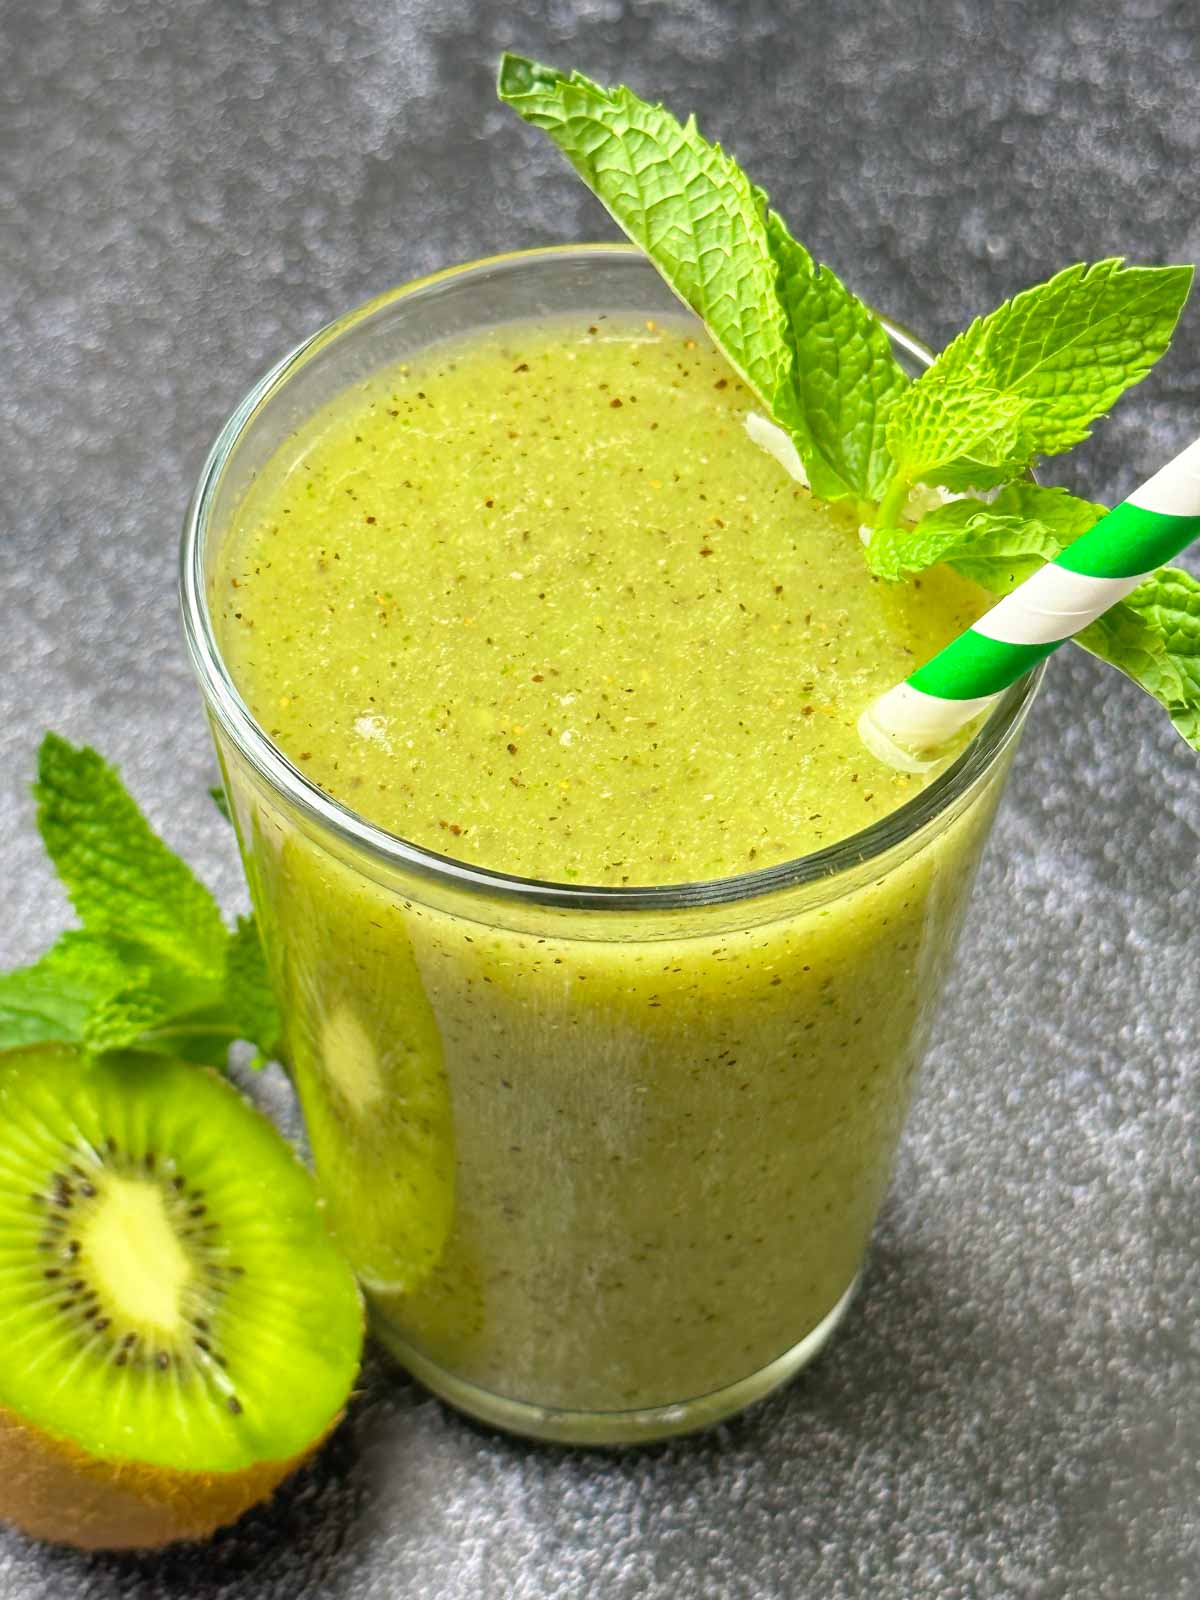 kiwi juice served in a glass garnished with mint and ½ kiwi ont he side